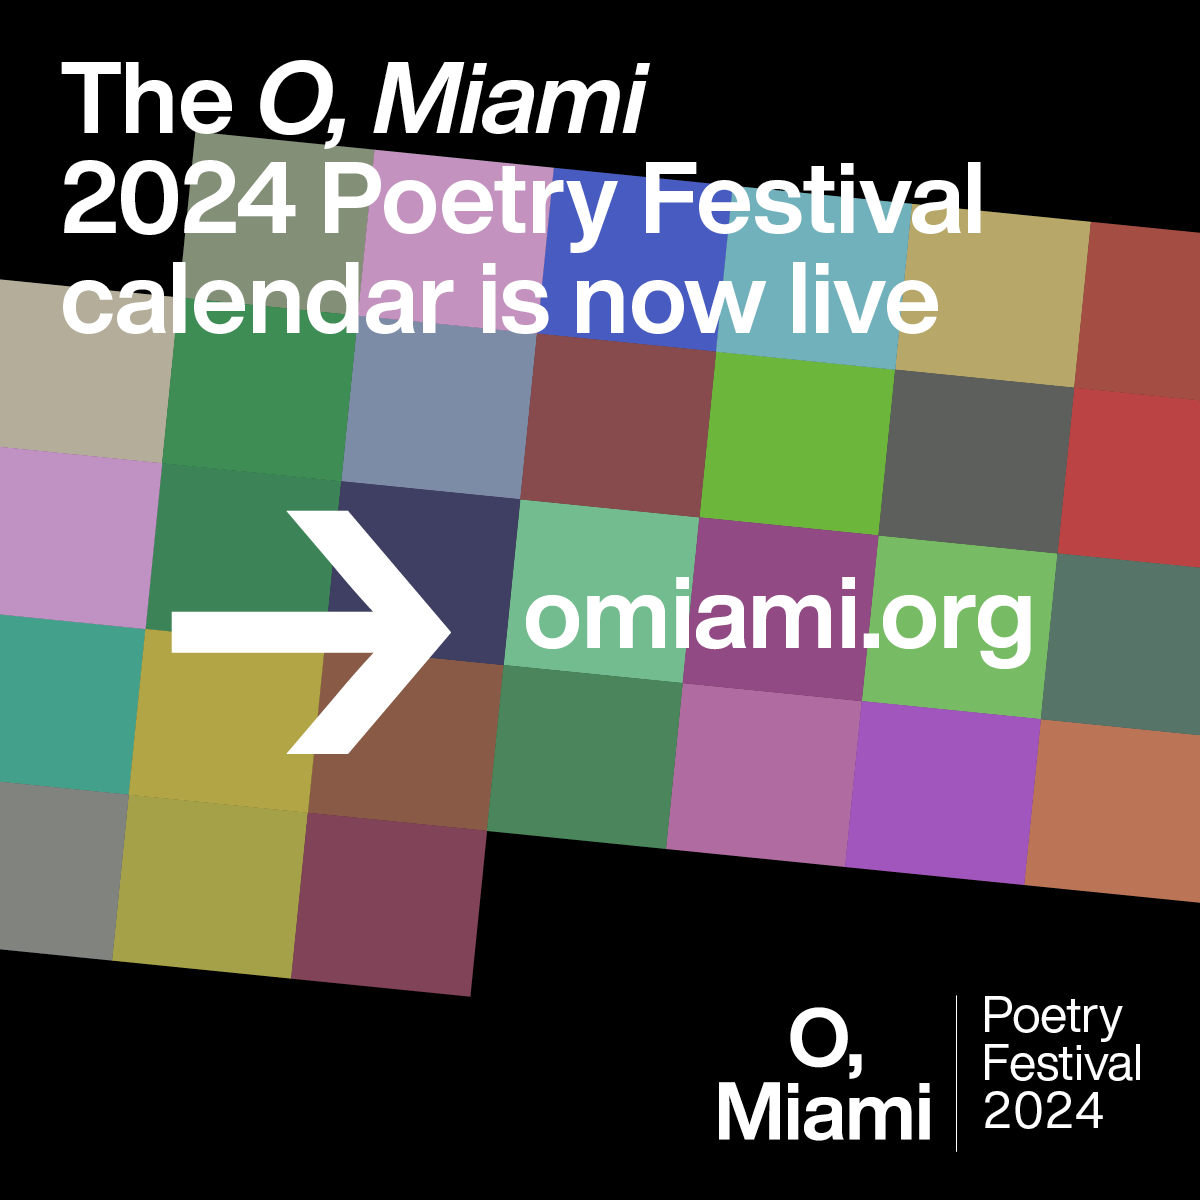 The O Miami Poetry Festival 2024 calendar of events is now live